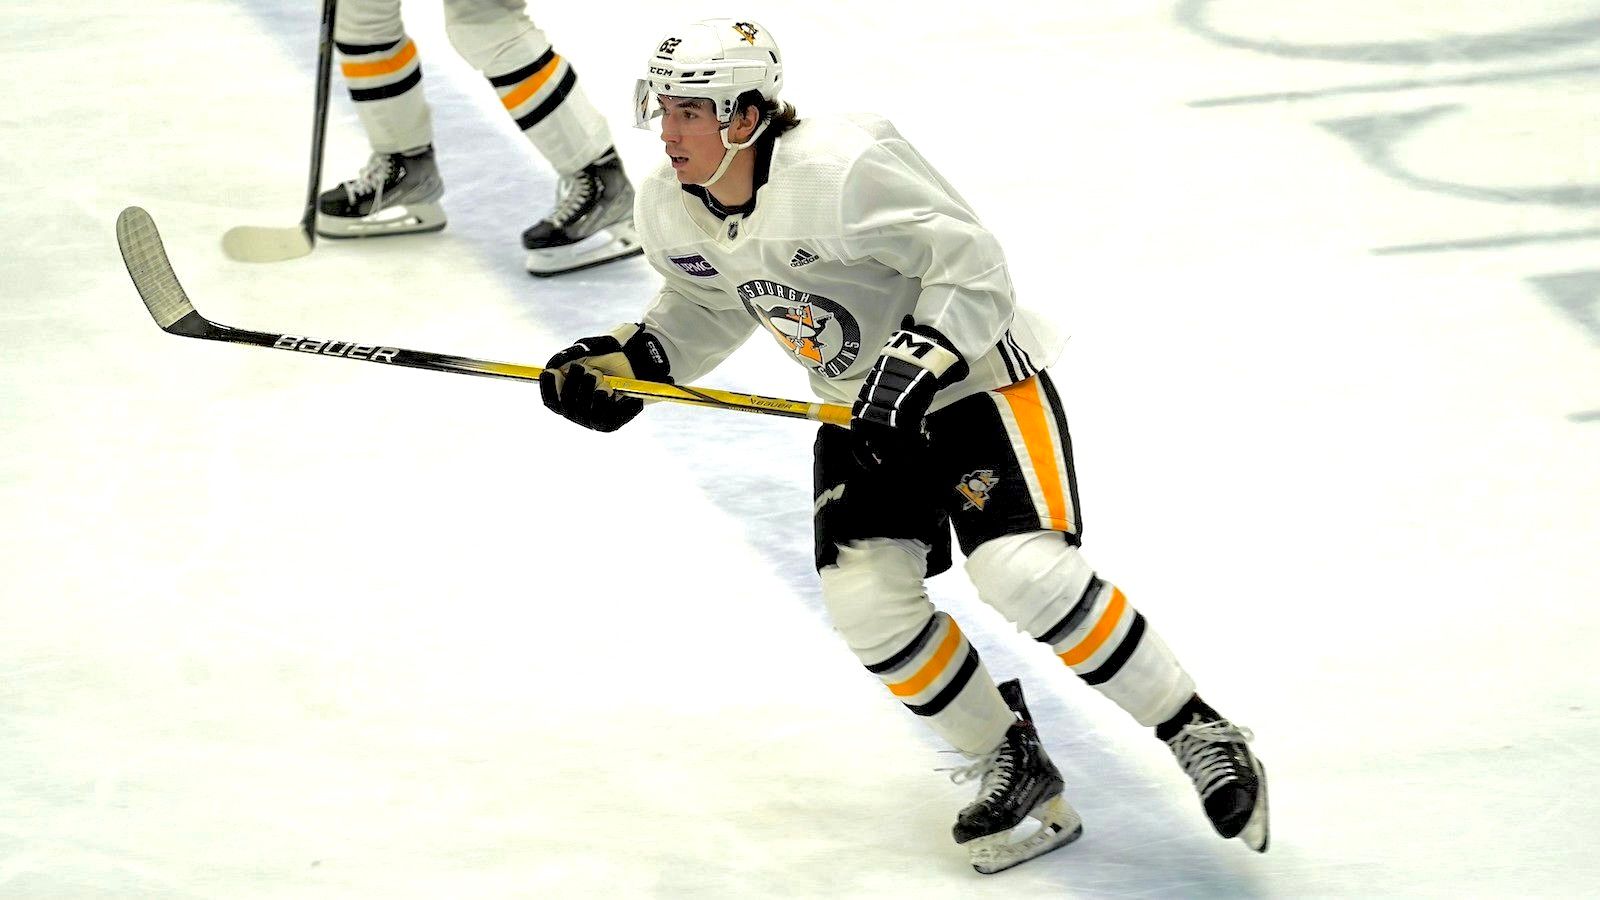 PENGUINS TO PARTICIPATE IN PROSPECTS CHALLENGE